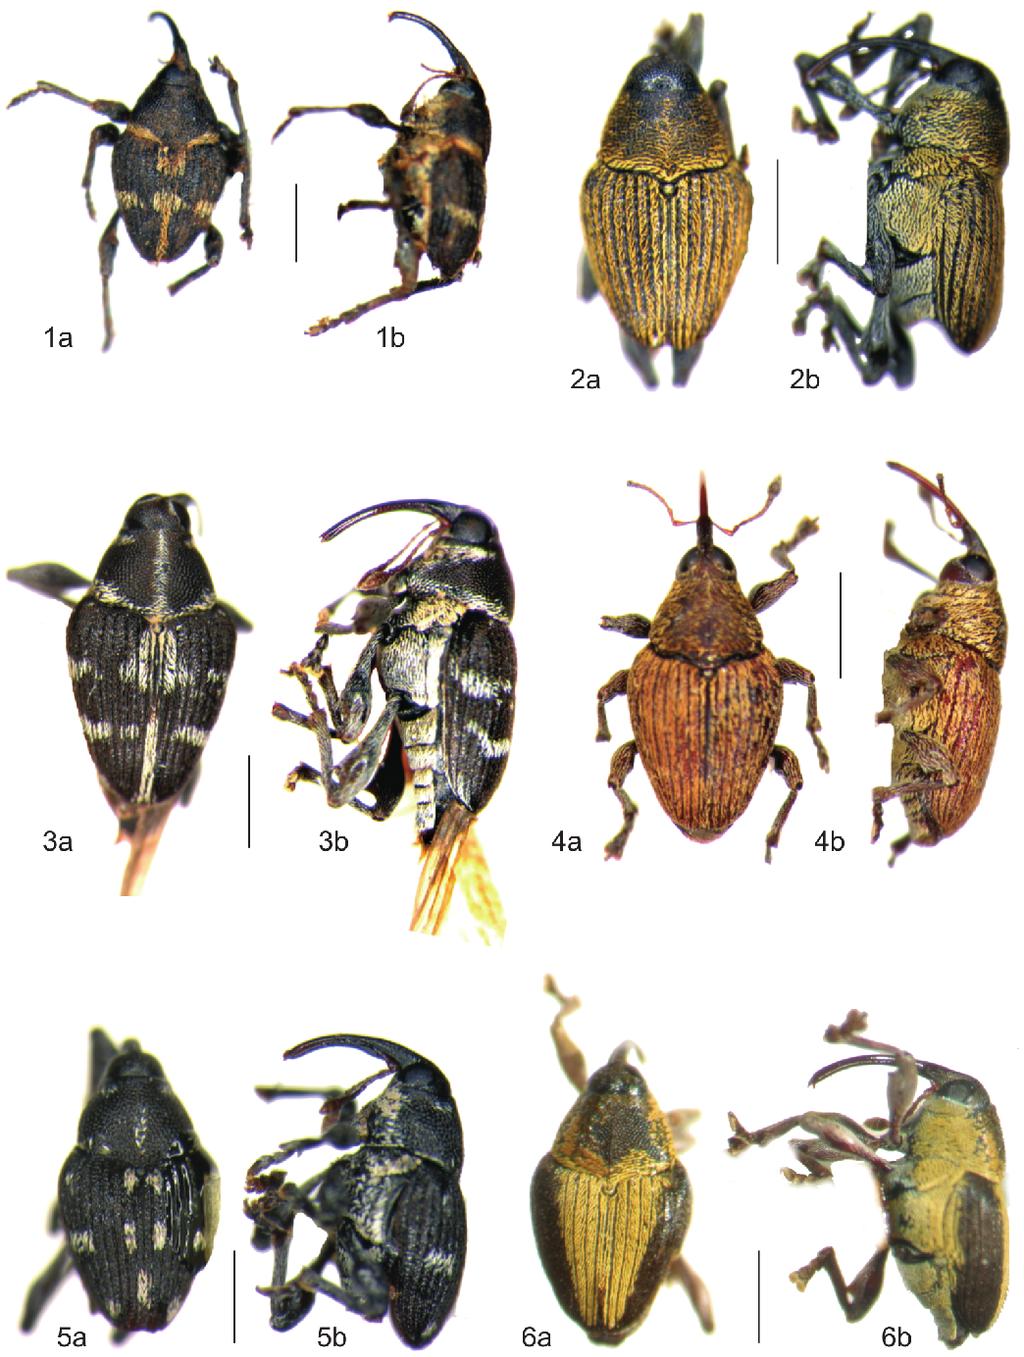 302 Koleopt. Rdsch. 79 (2009) Figs. 1 6: Habitus photographs of Indocurculio in dorsal (a) and lateral (b) view: 1) I.